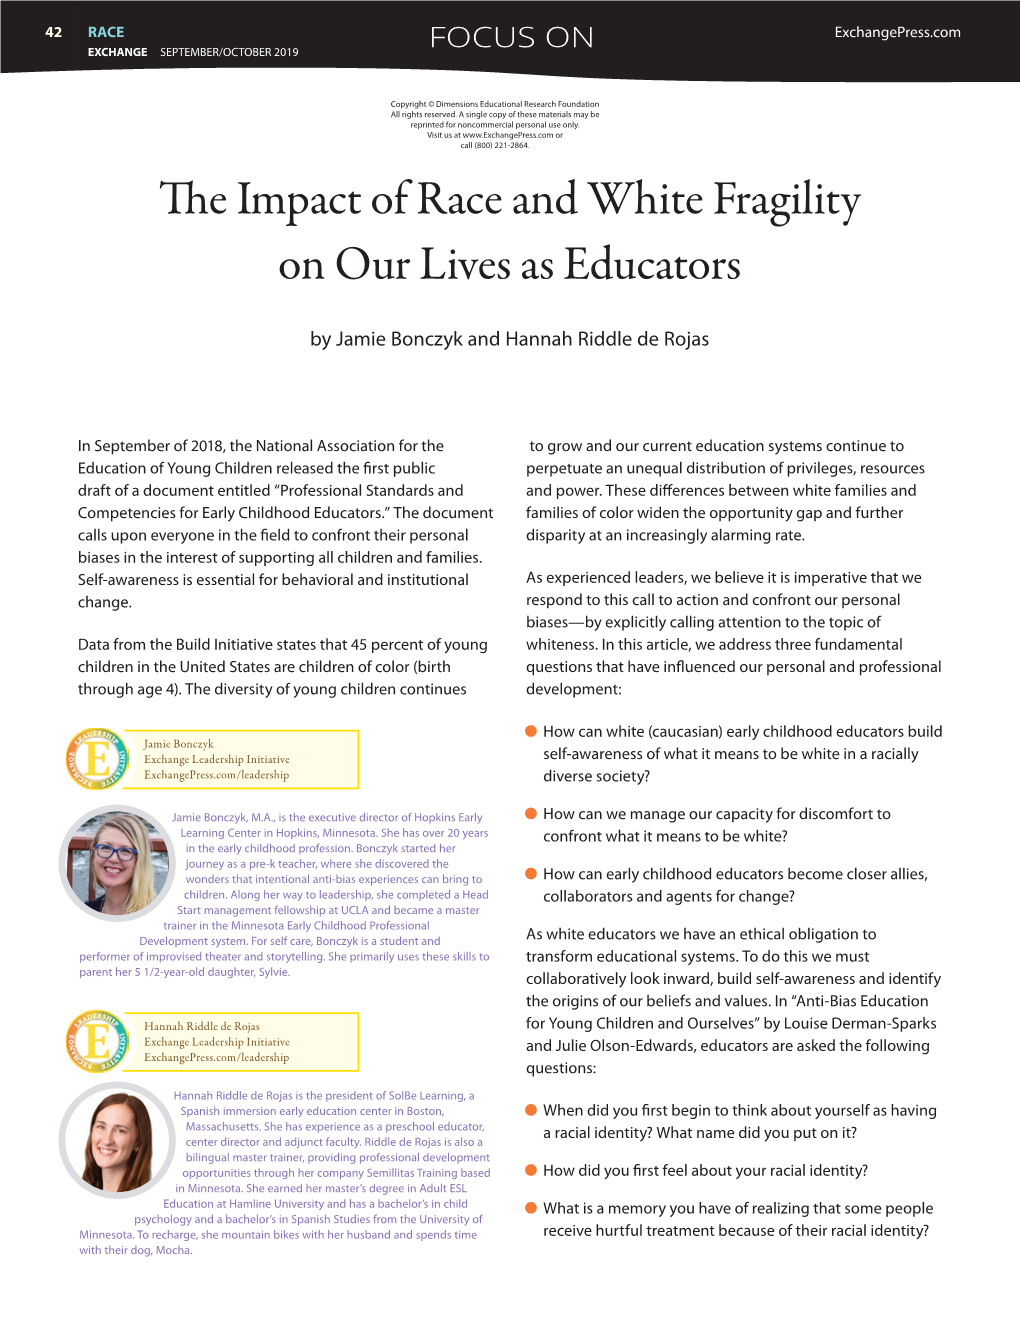 The Impact of Race and White Fragility on Our Lives As Educators